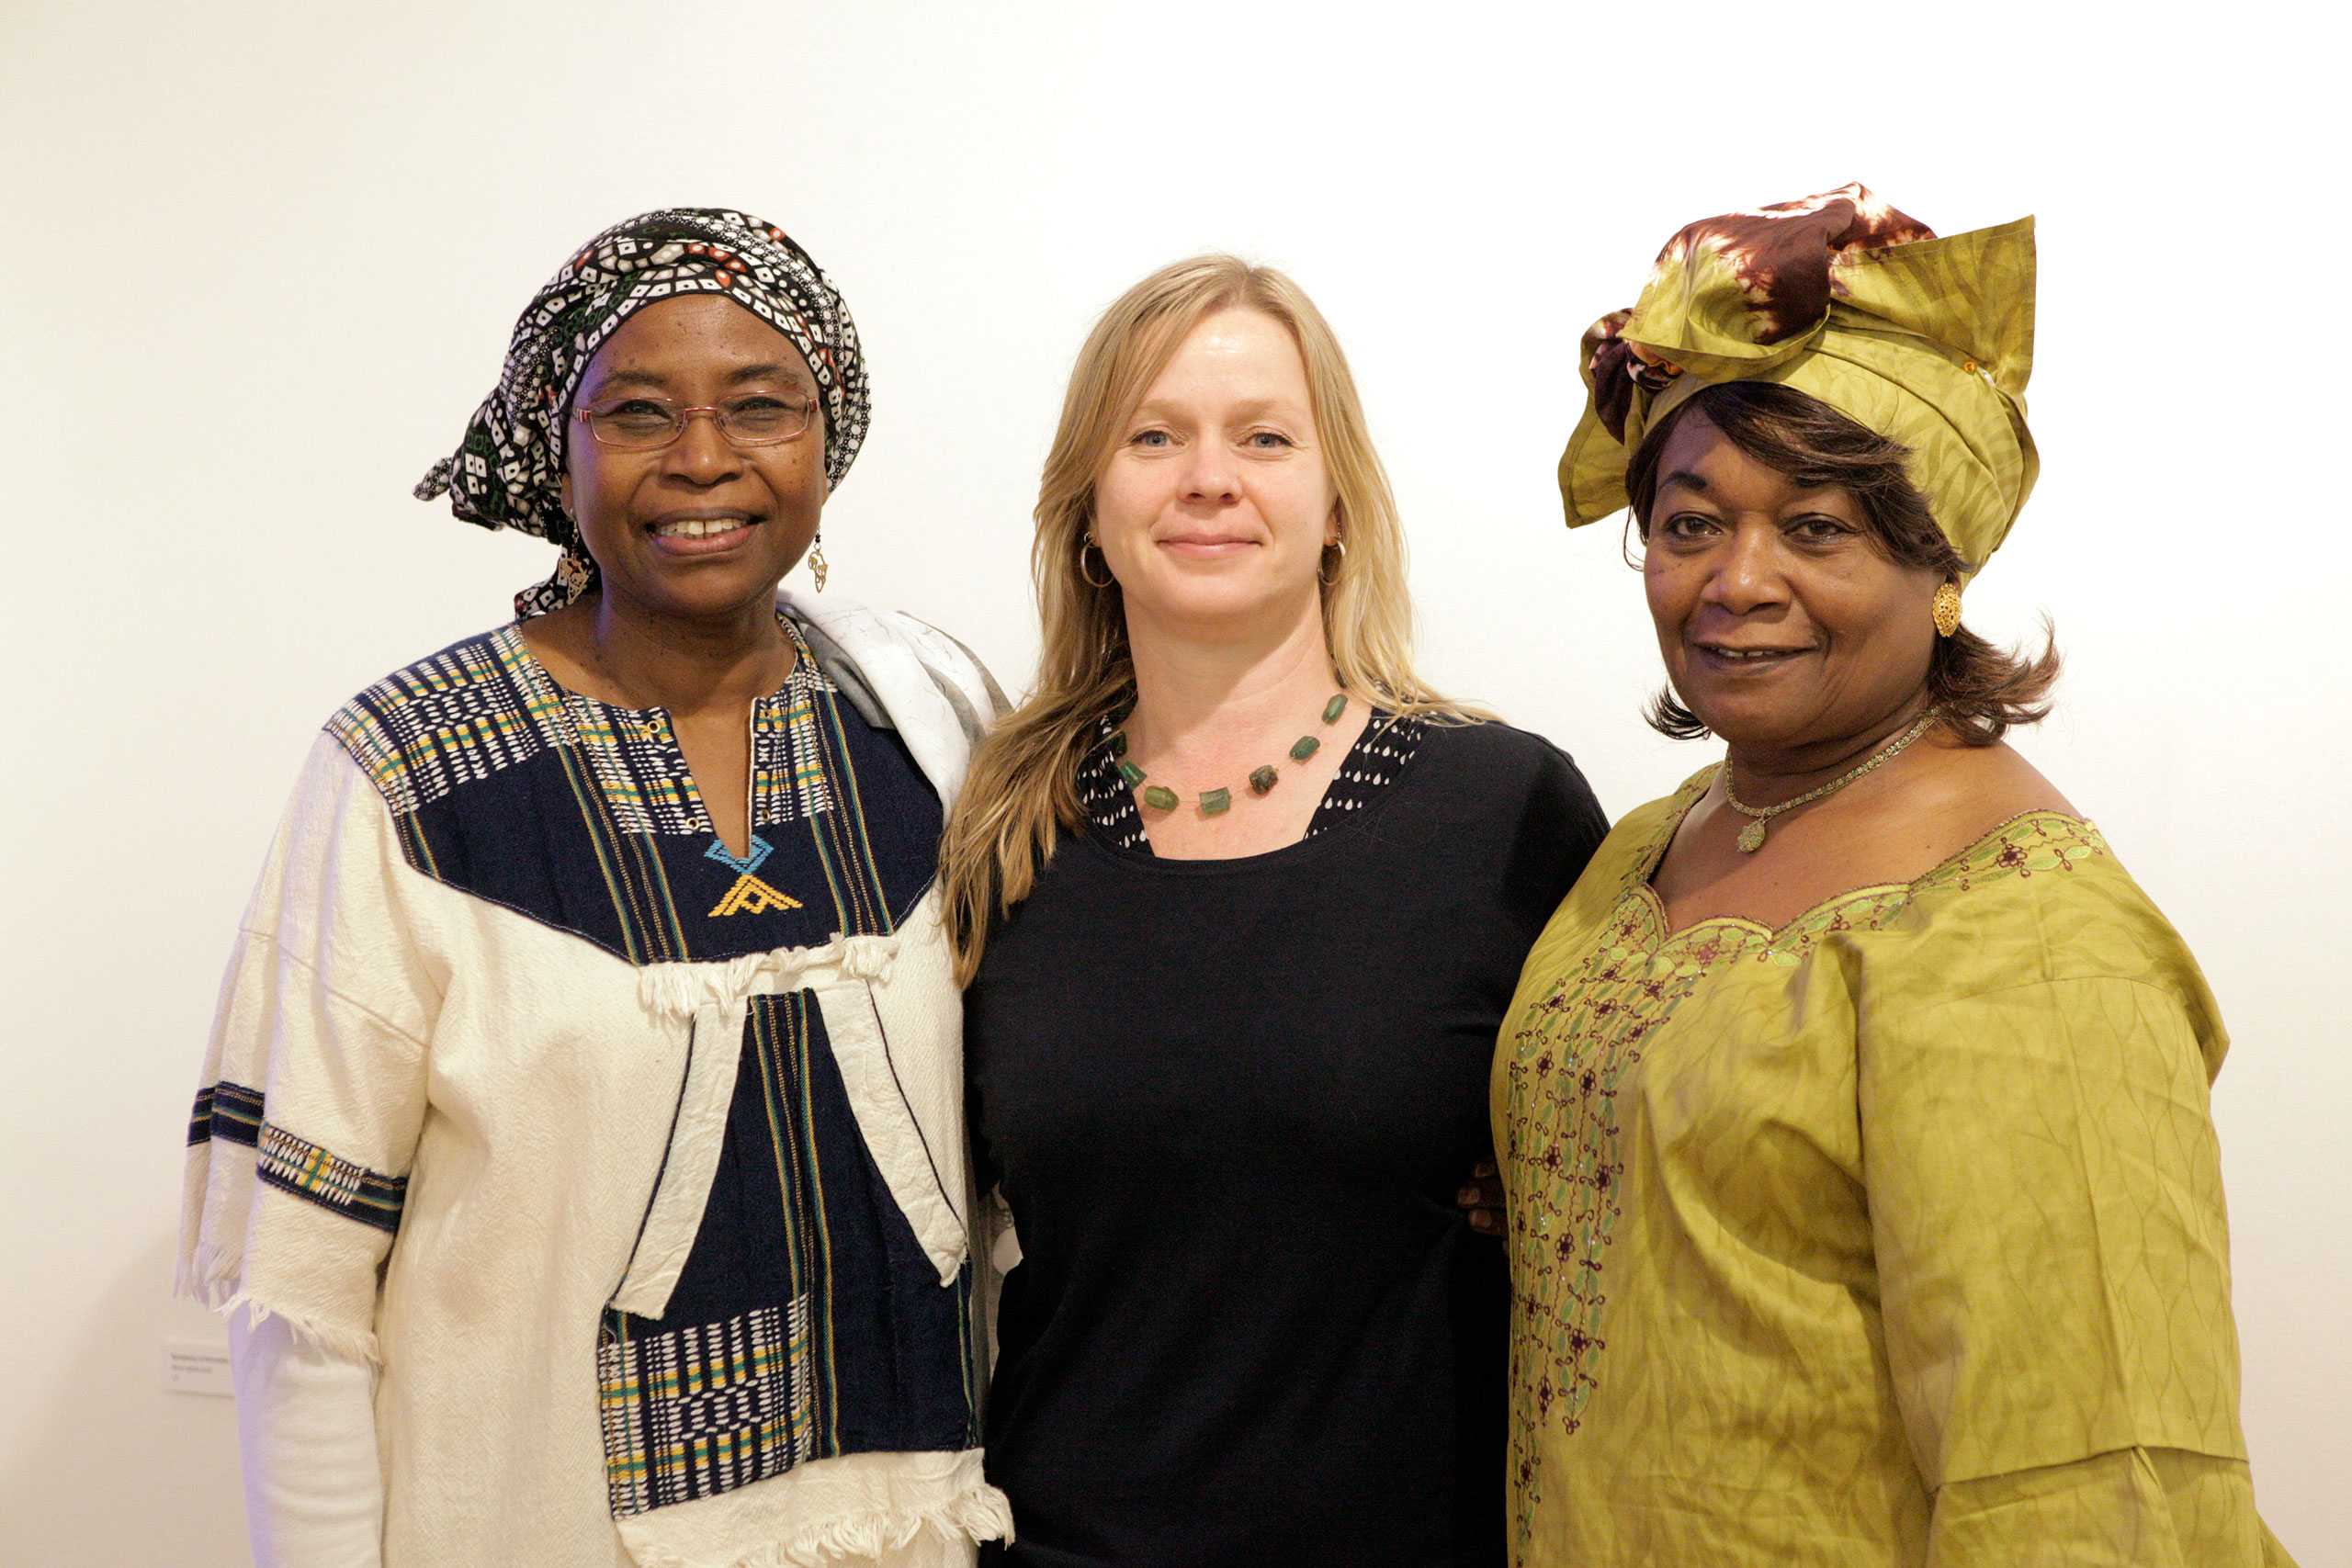 From left: Mukami McCrum, Iseult Timmermans and Harriette Campbell.